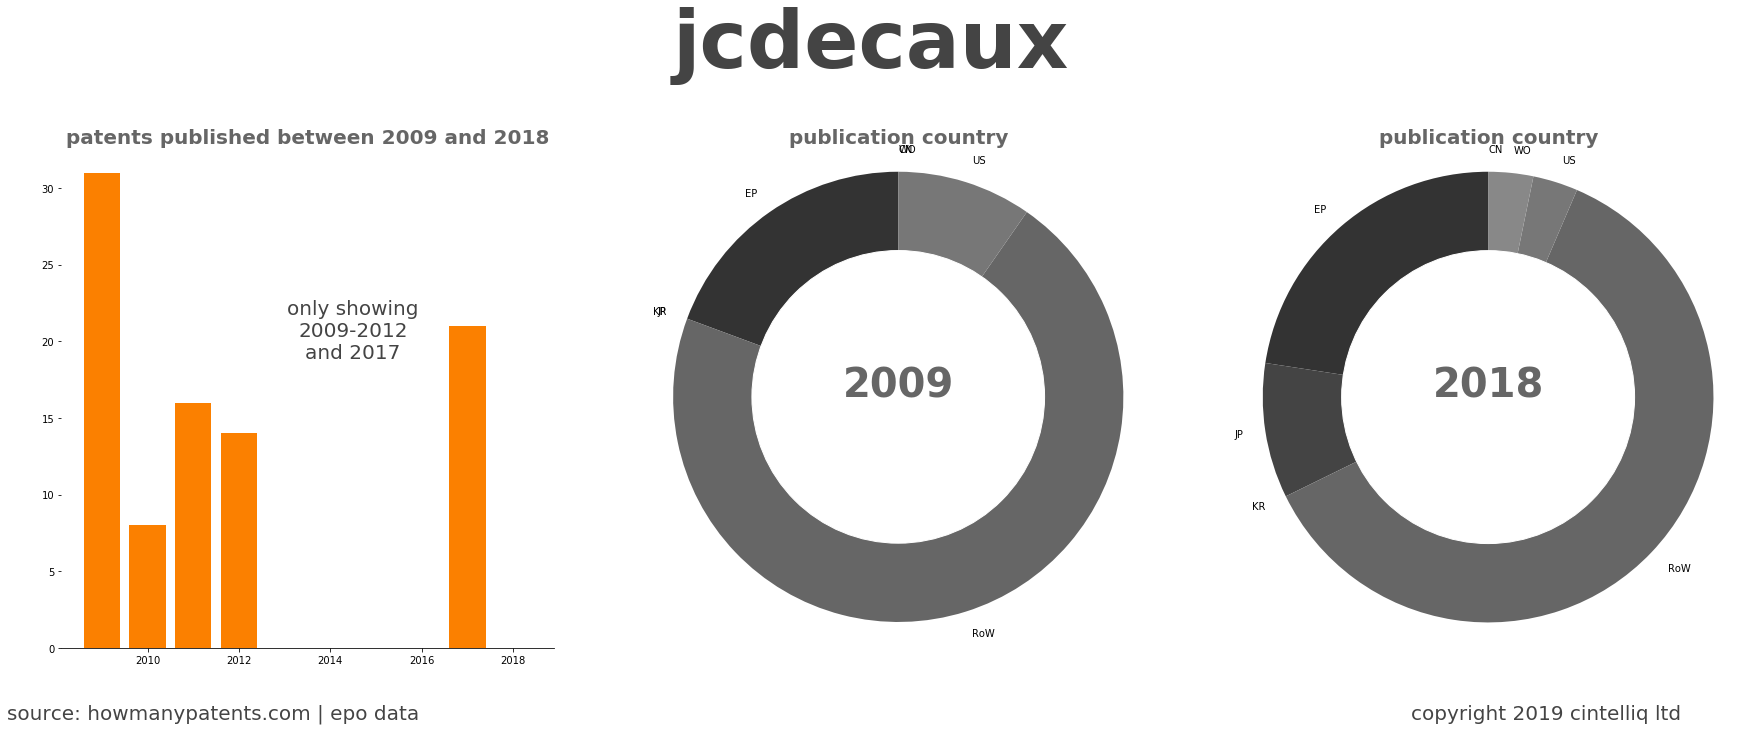 summary of patents for Jcdecaux